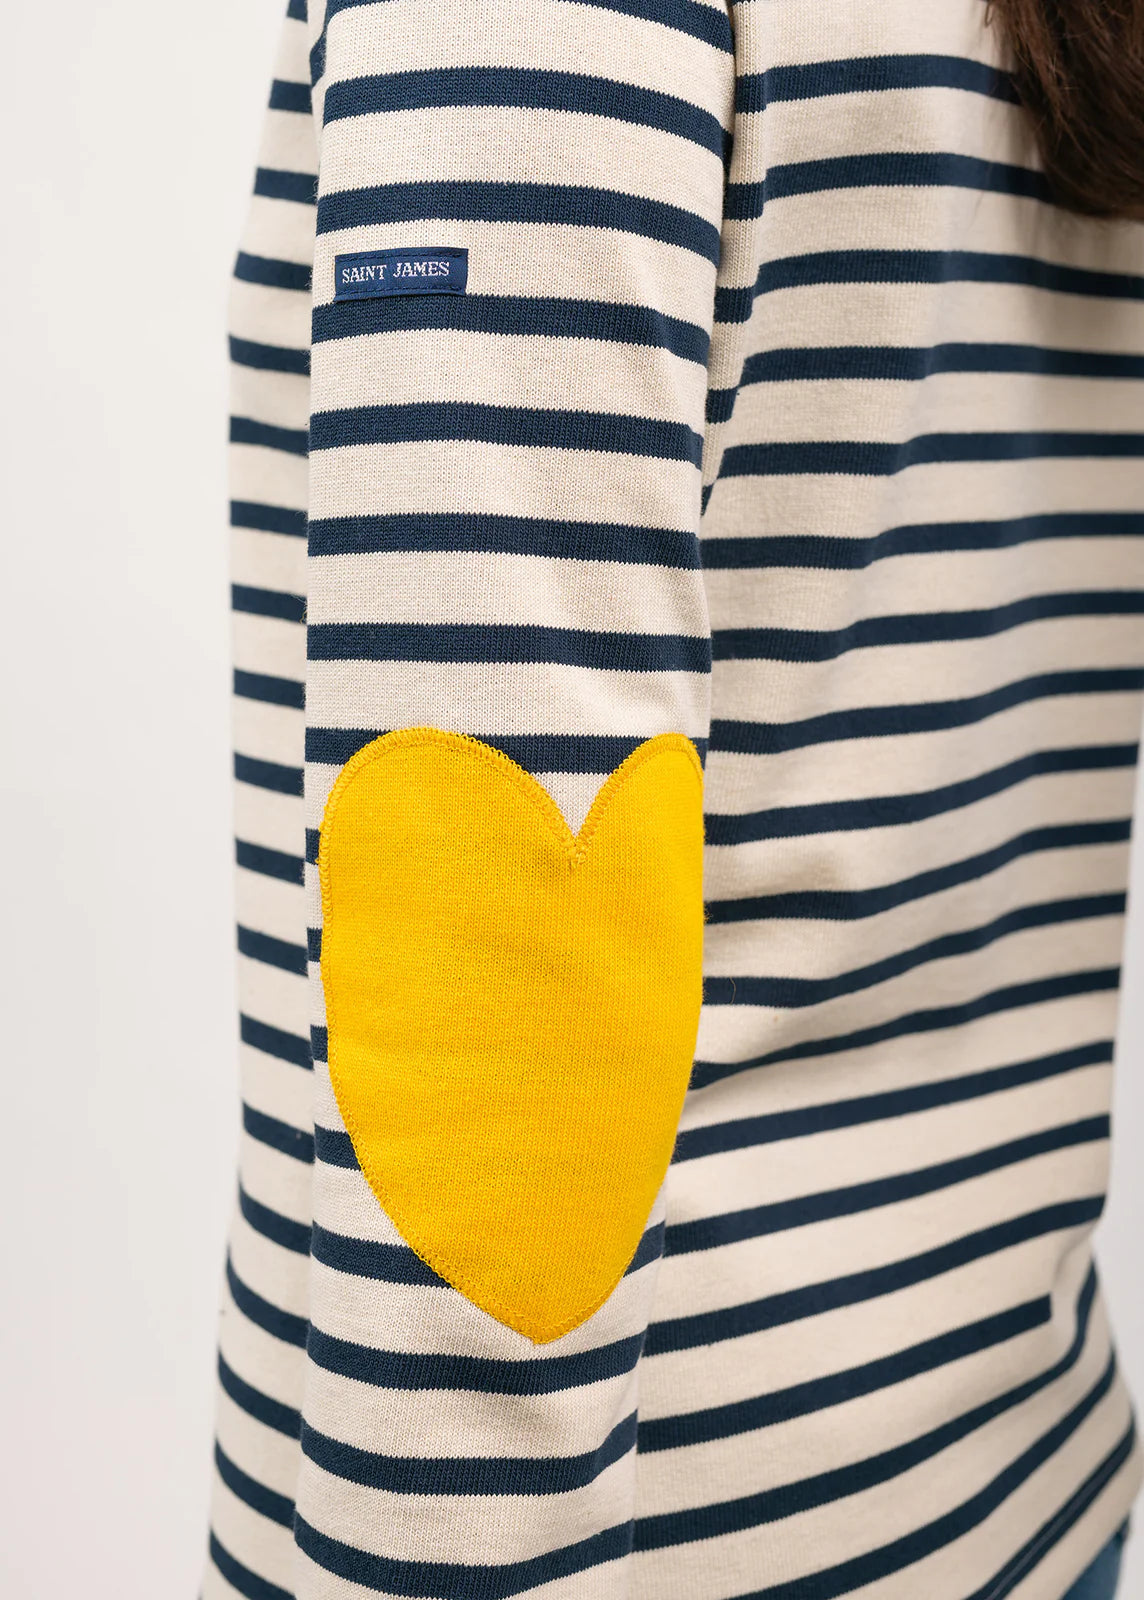 Vaujany Striped Tee Shirt in Navy with Yellow